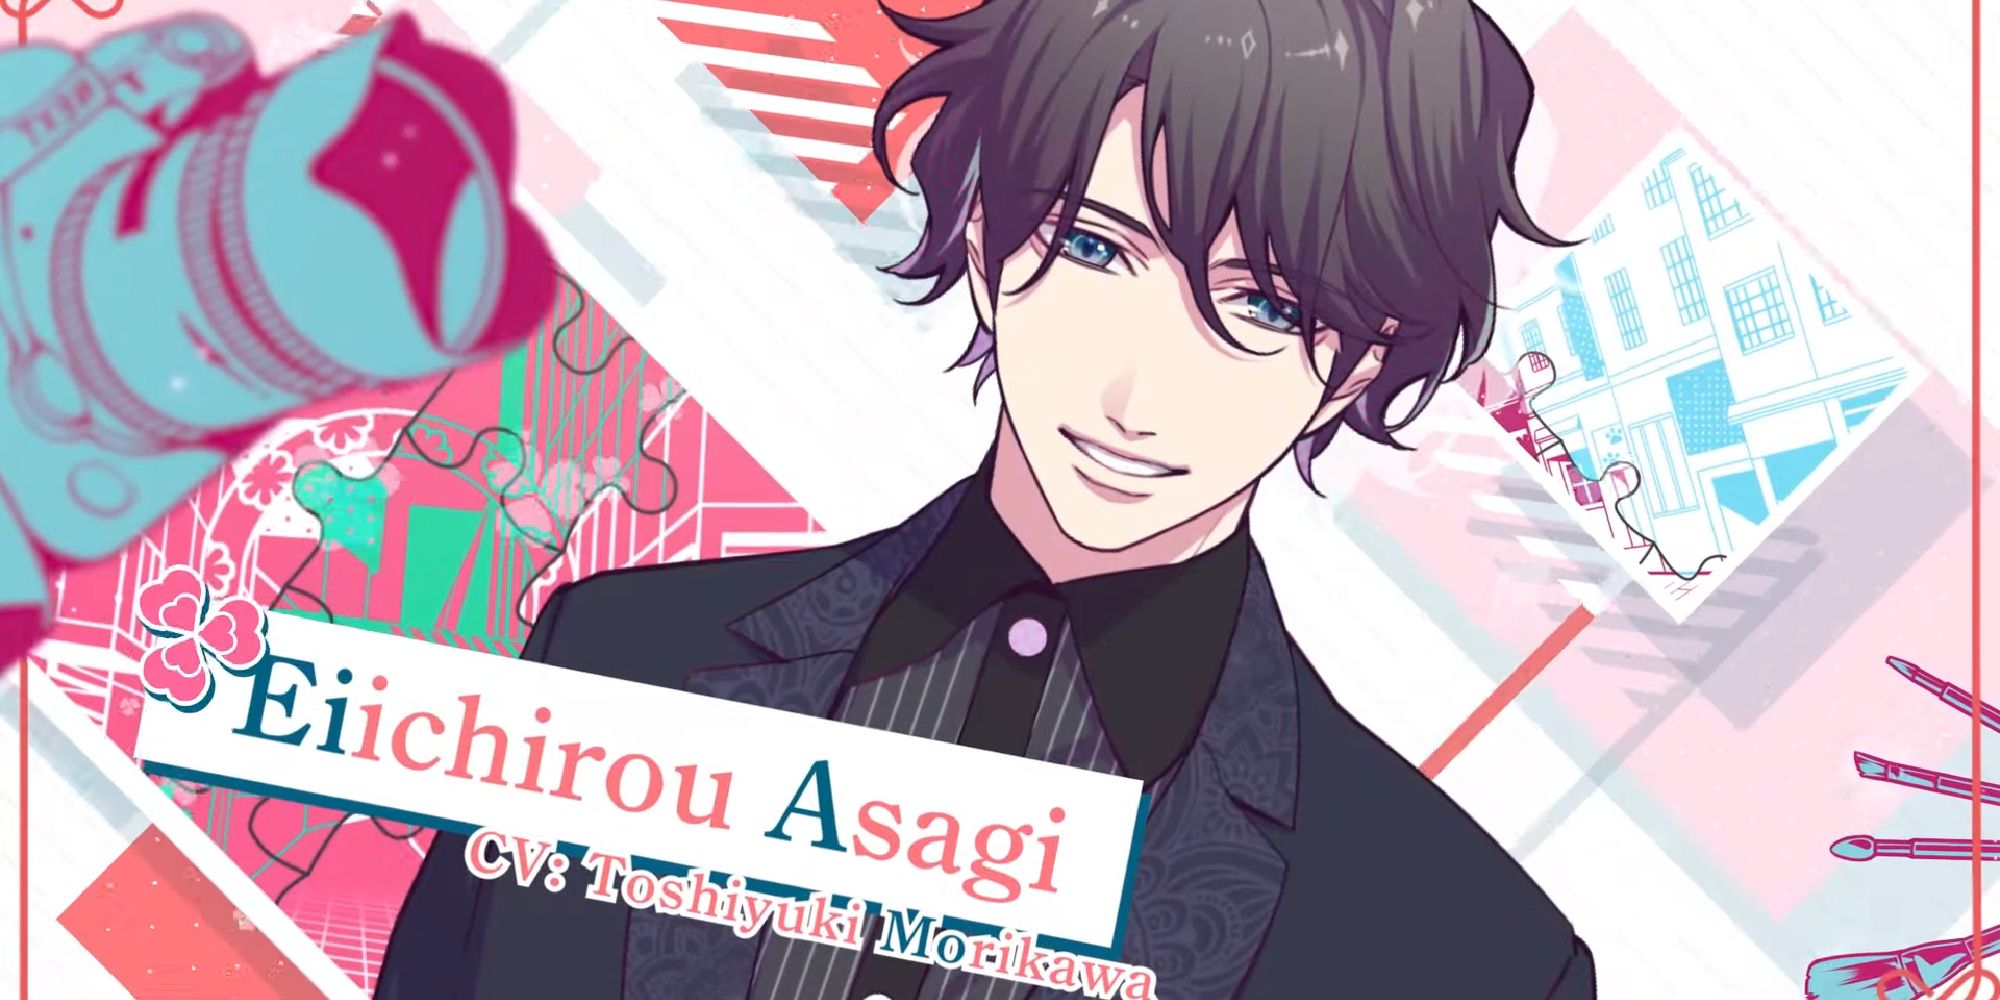 intro card for eiichirou asagi with voice actor